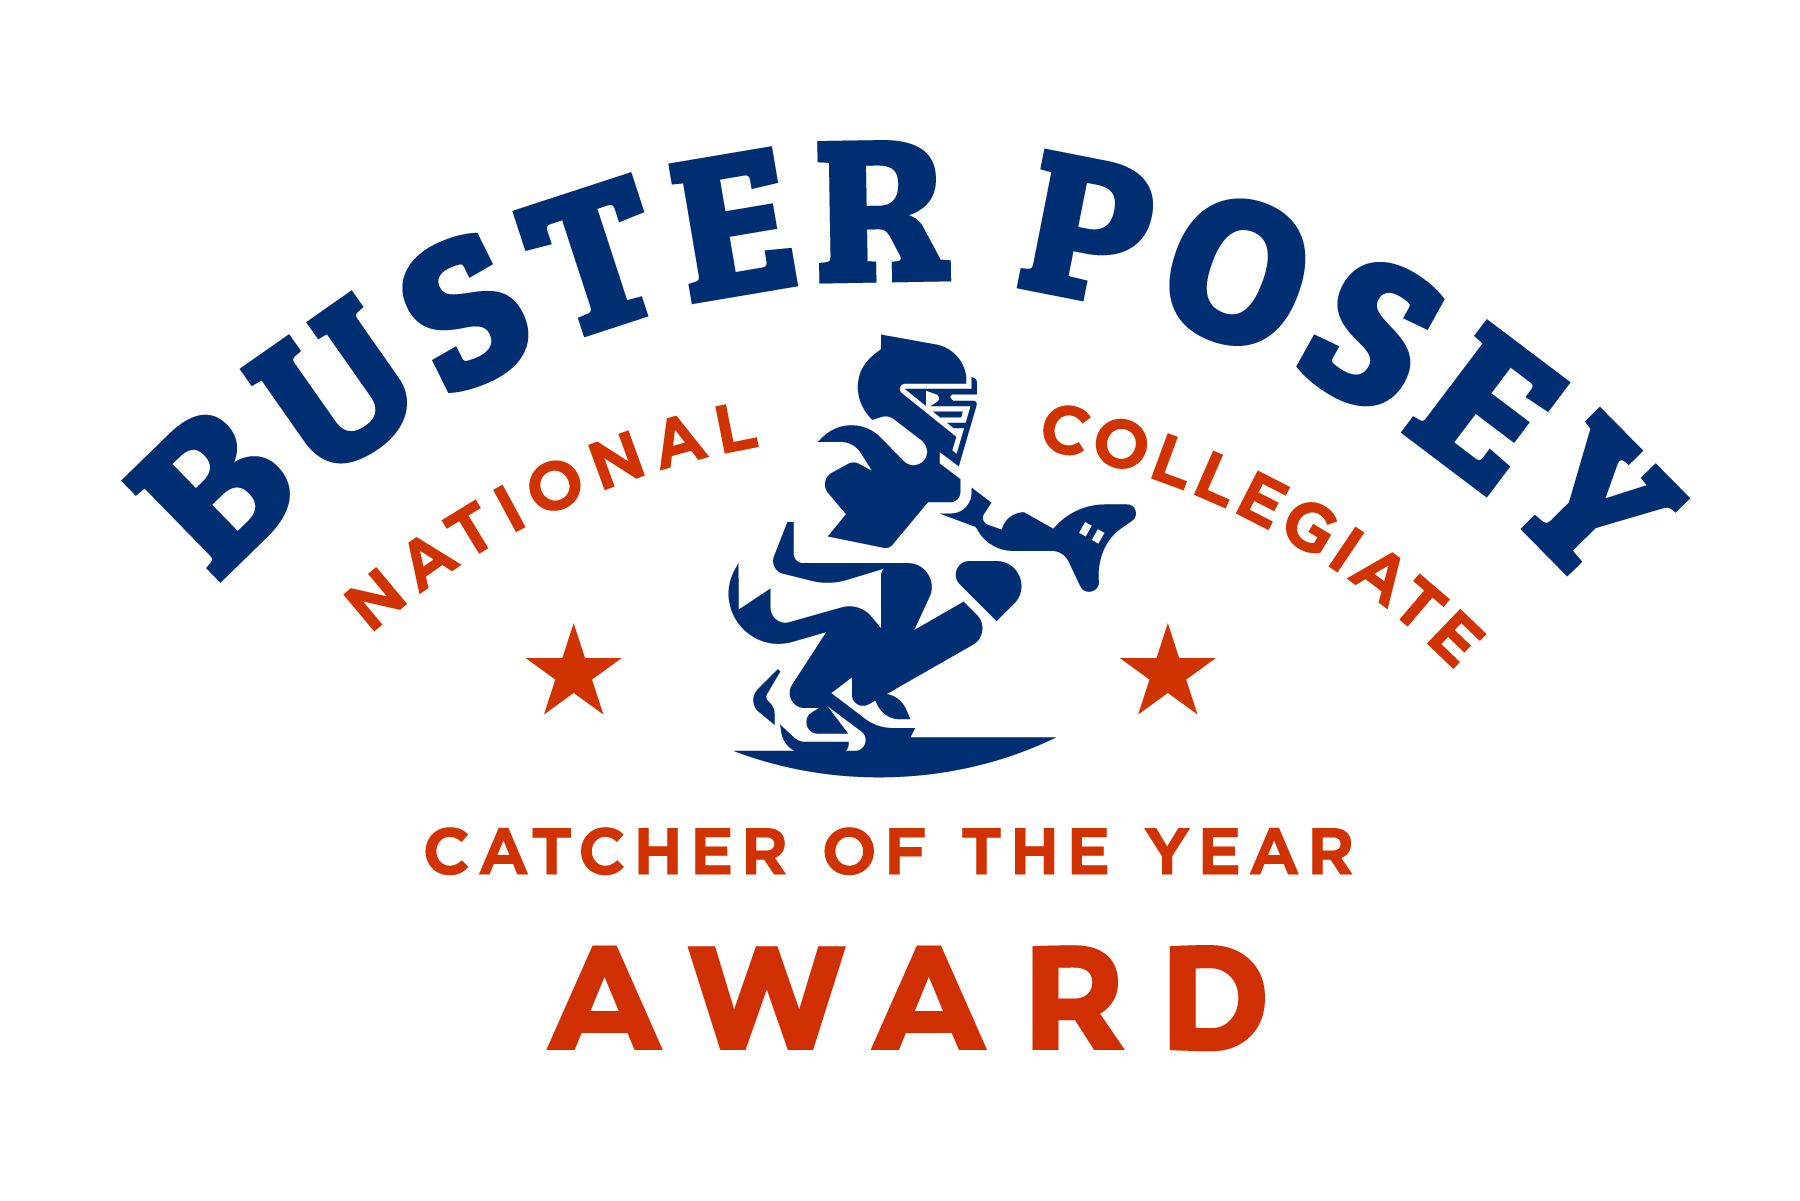 Buster Posey Award - Greater Wichita Area Sports Commission